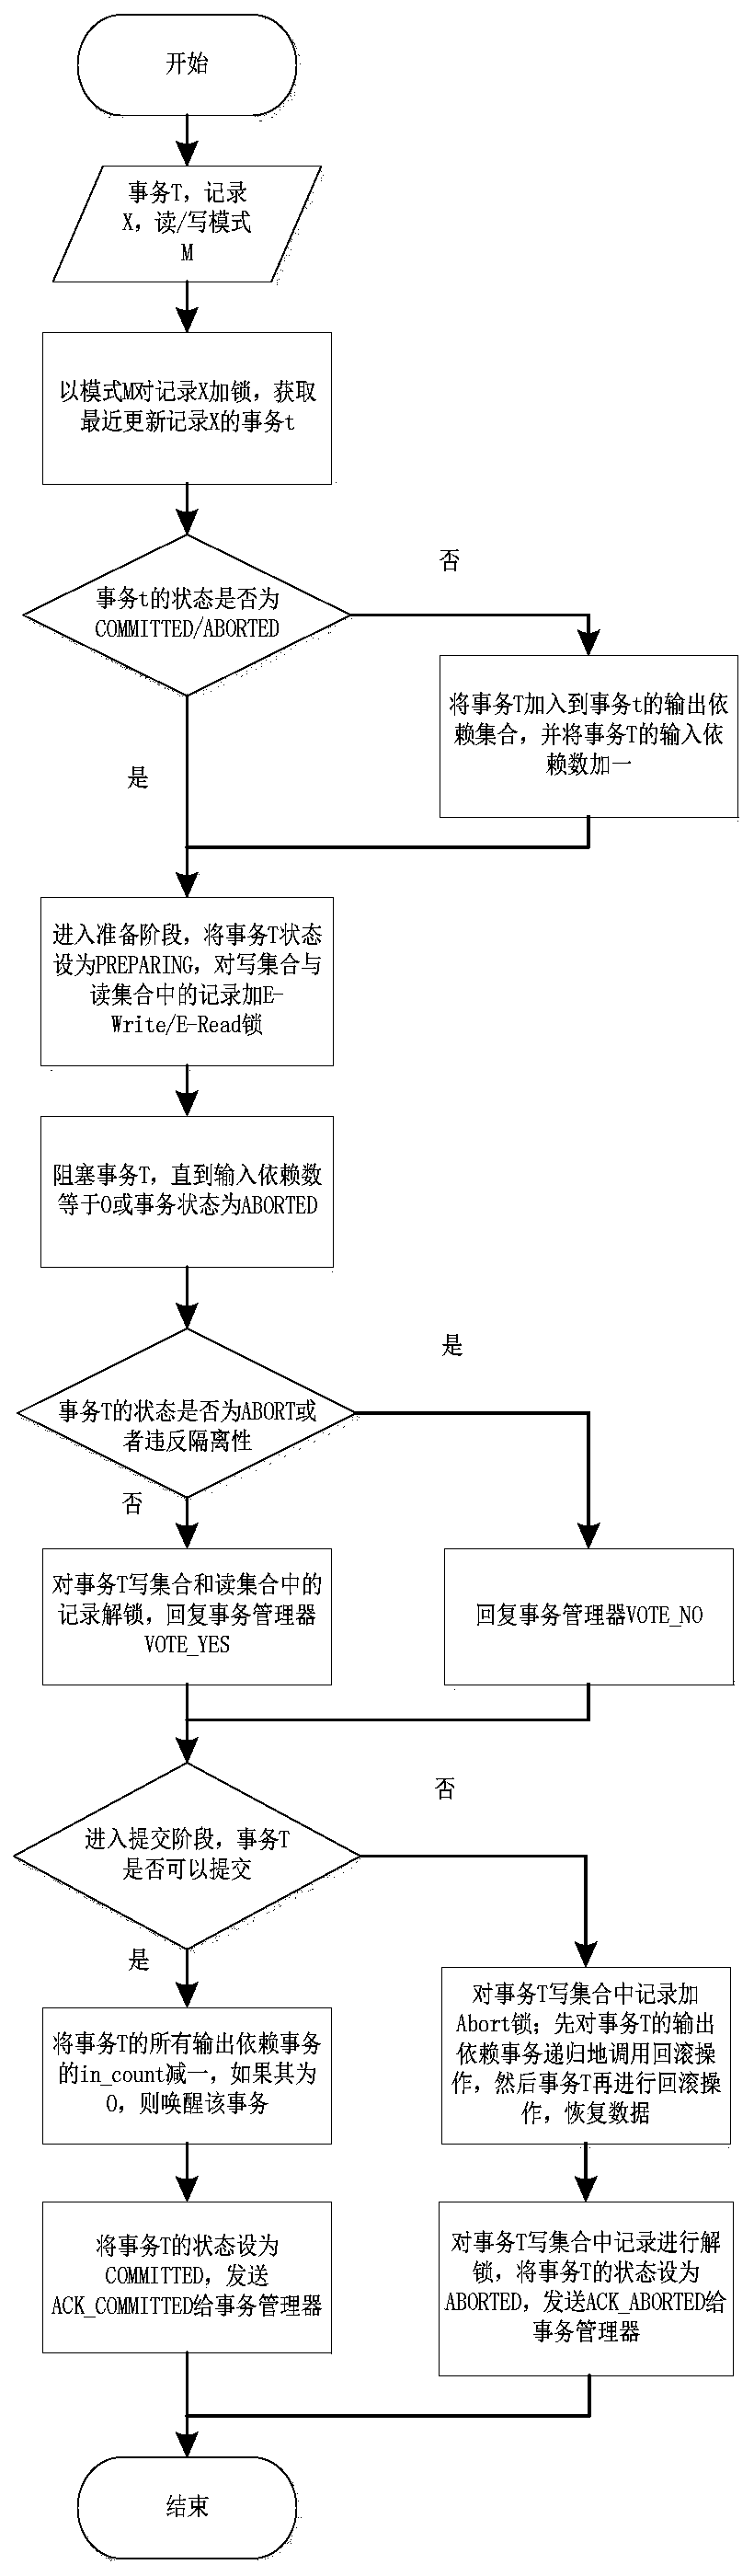 Method for processing distributed transactions in distributed database system